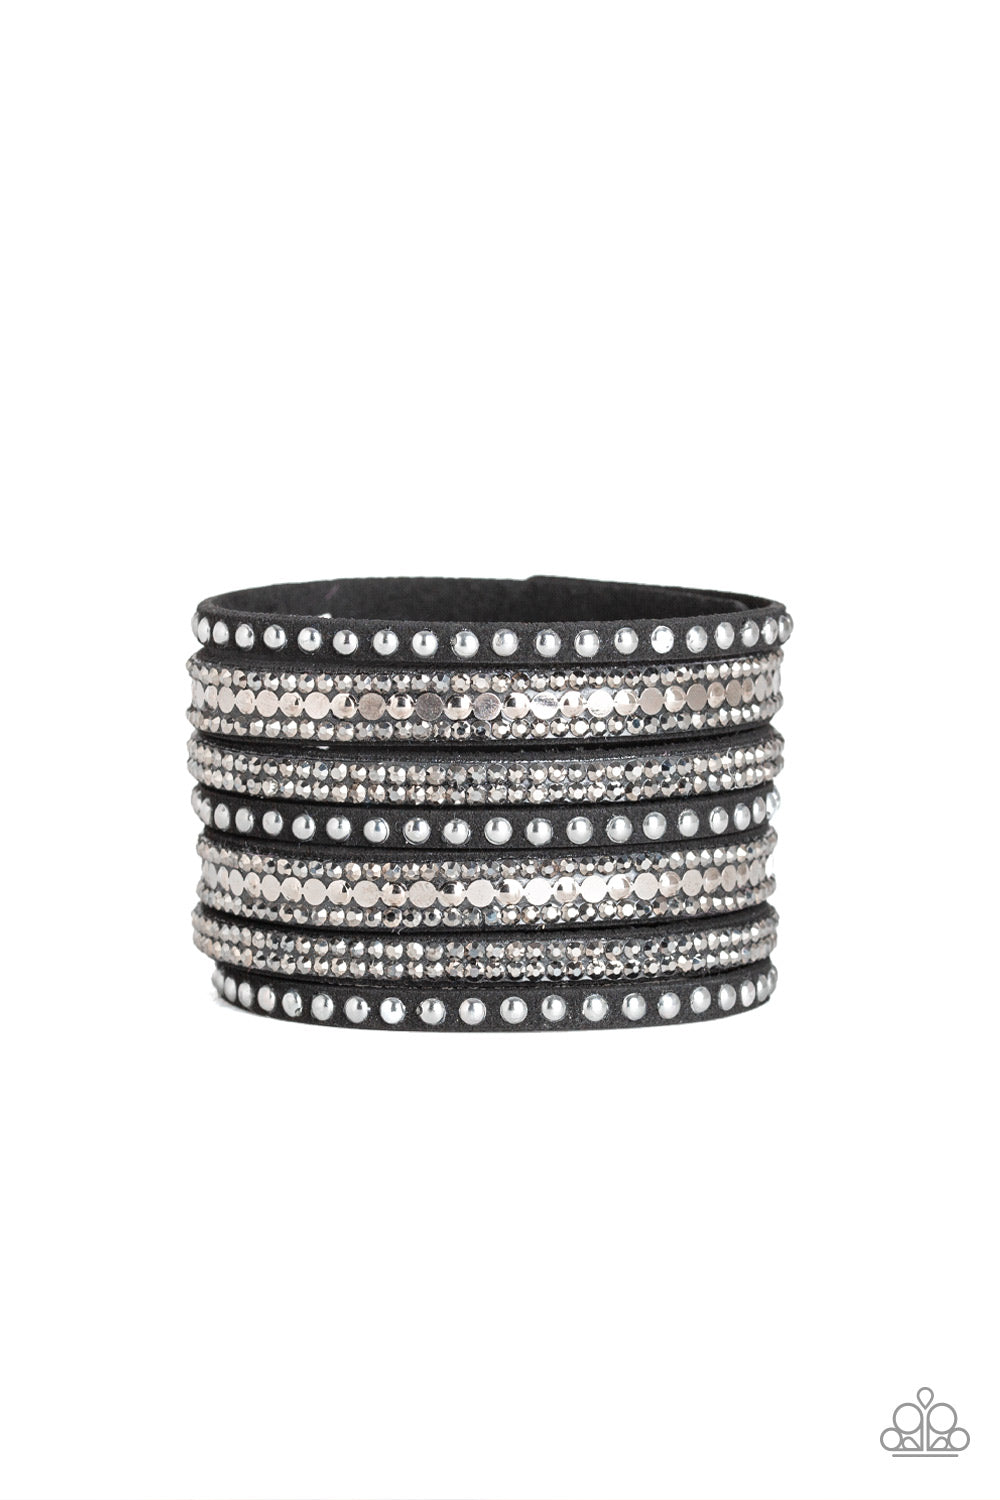 All Hustle and Hairspray - Black Bracelet - Paparazzi Accessories